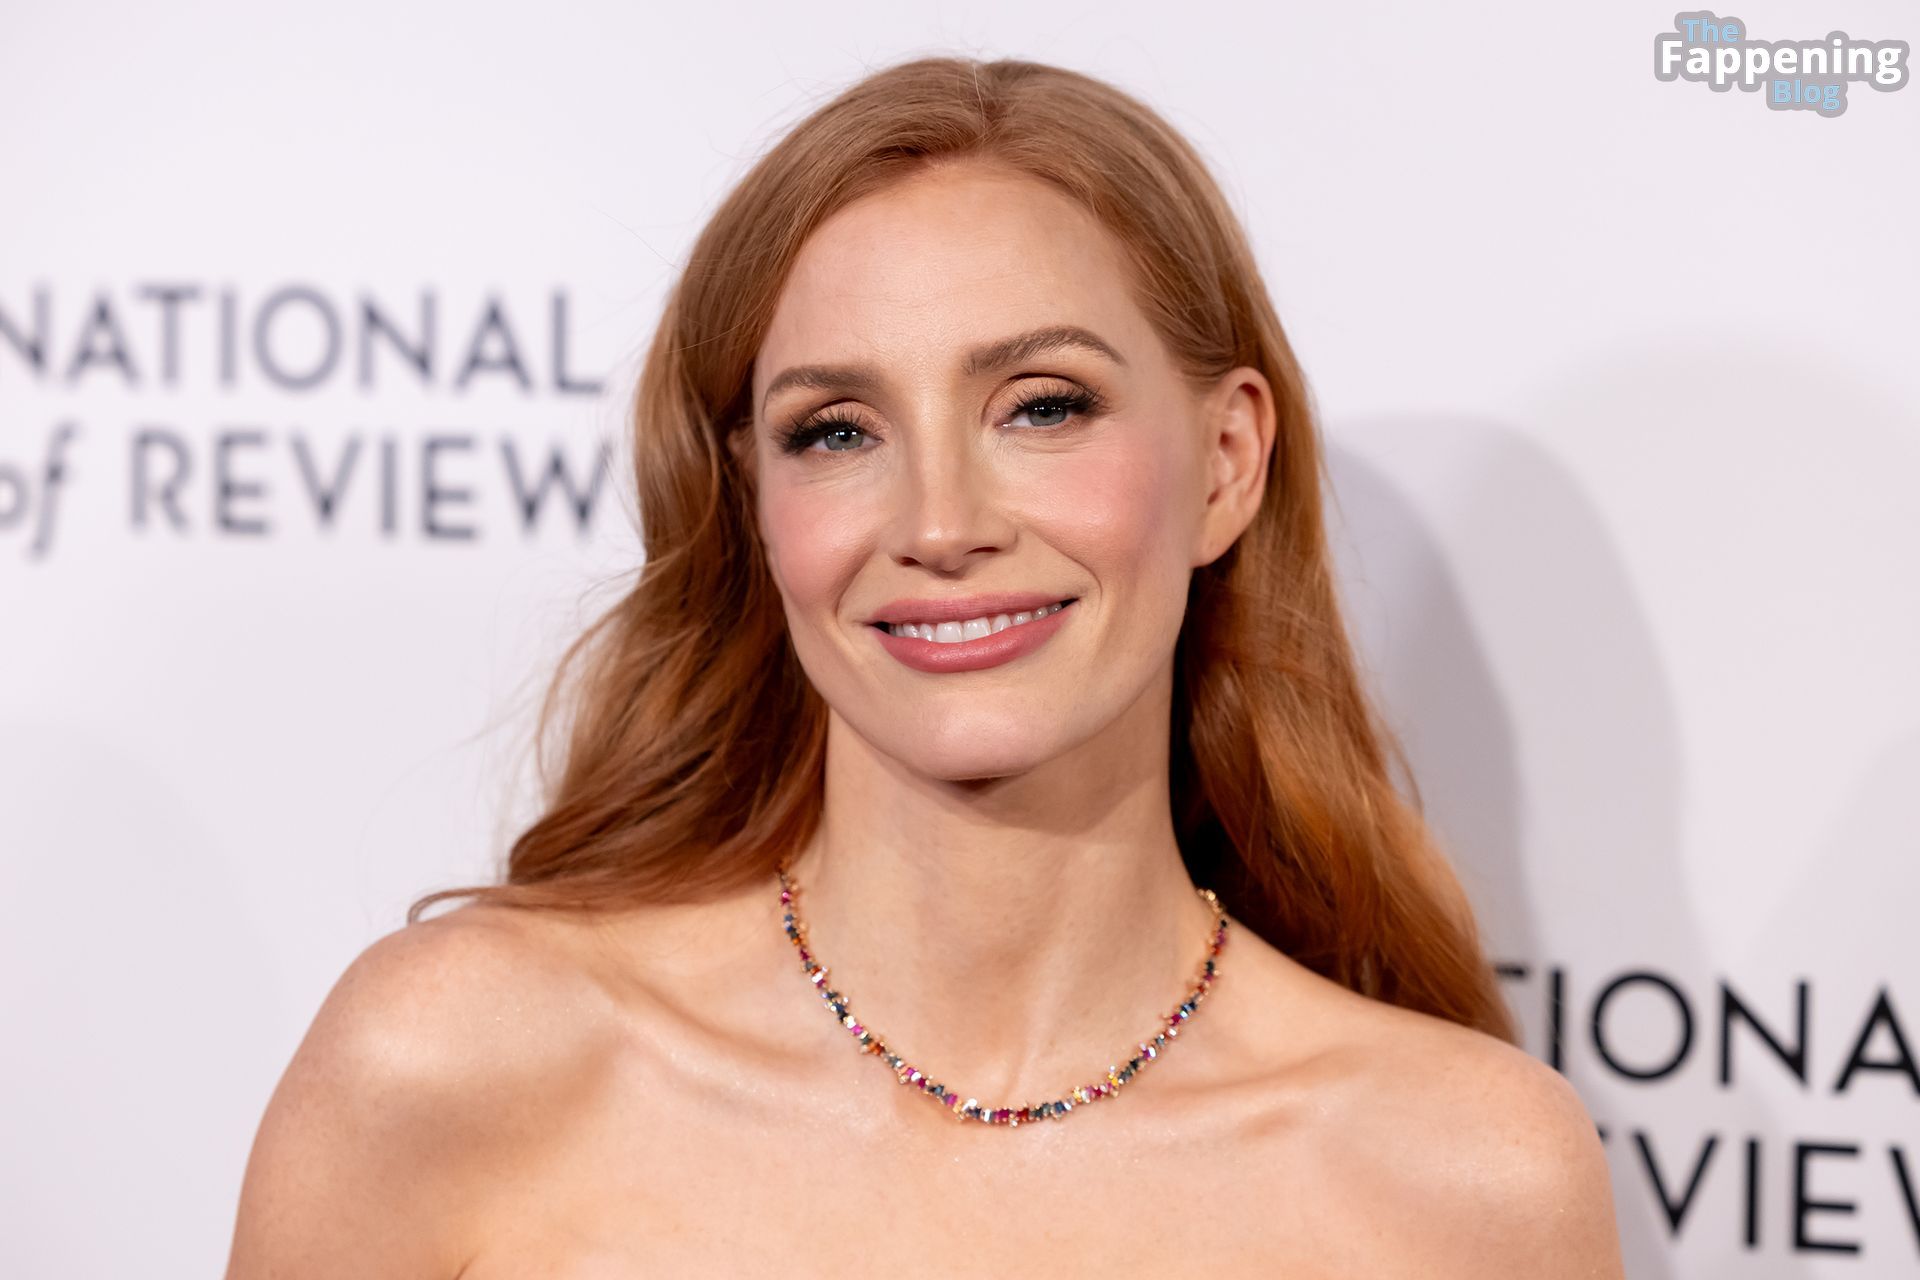 Jessica-Chastain-Sexy-24-The-Fappening-Blog.jpg